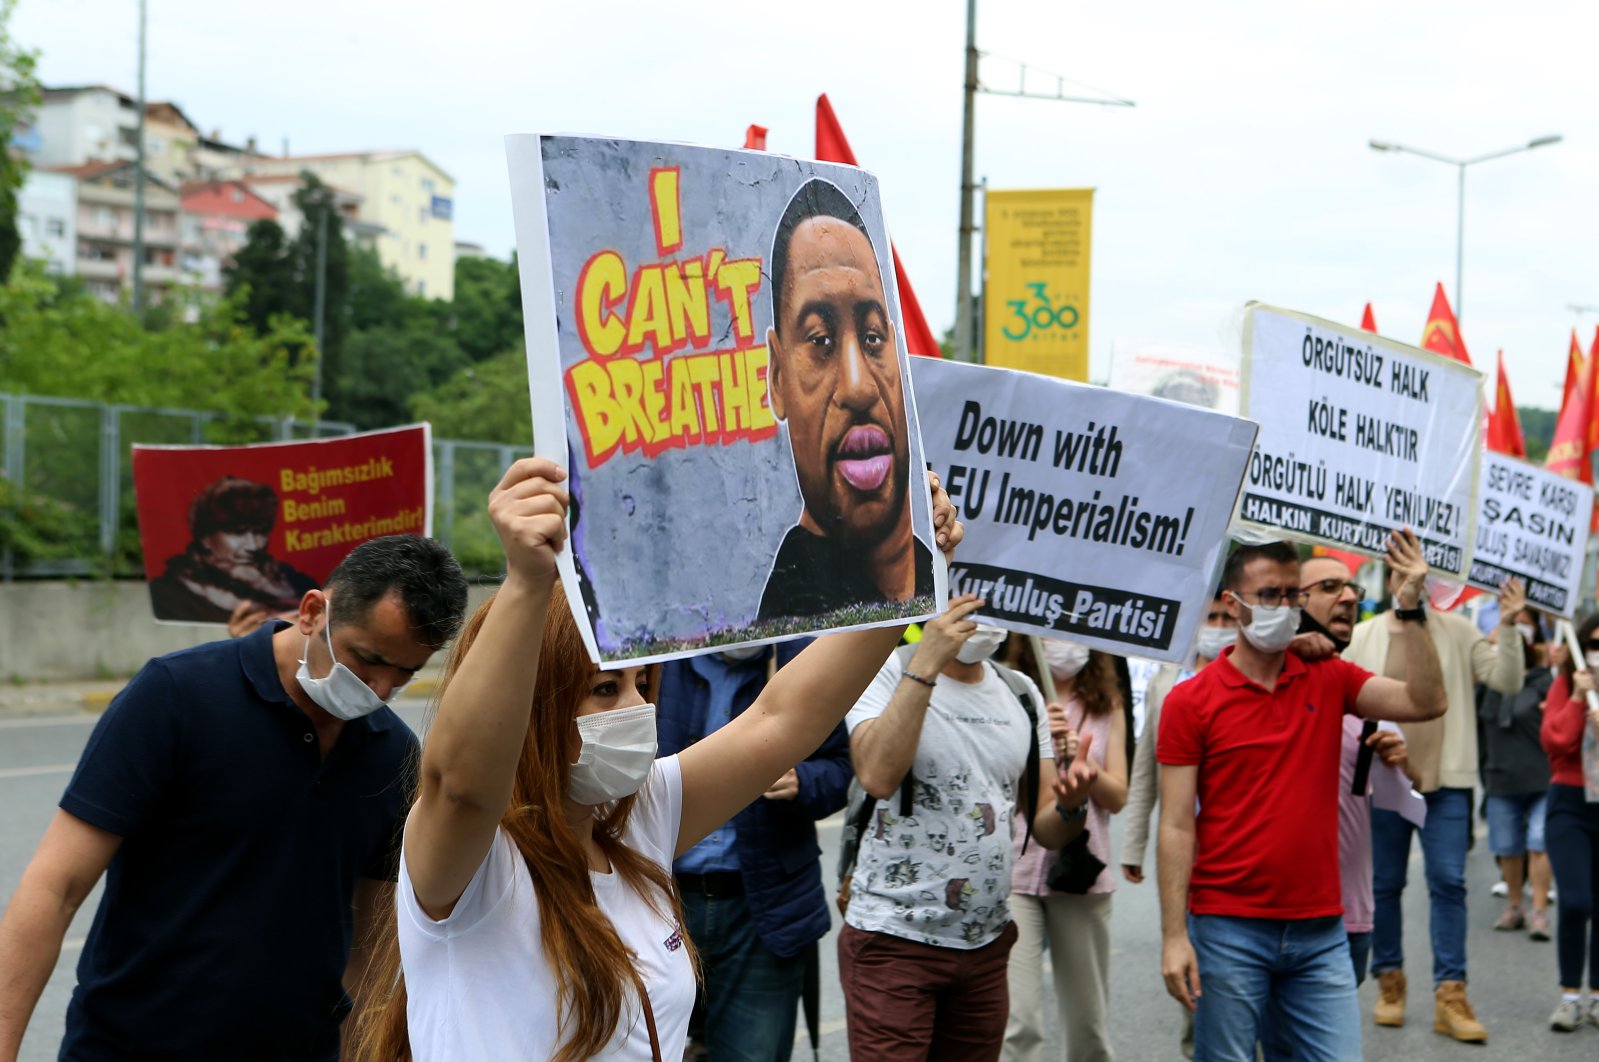 Protesters decry the killing of George Floyd outside the U.S. Consulate General in Istanbul, Turkey, June 14, 2020. (AA Photo)